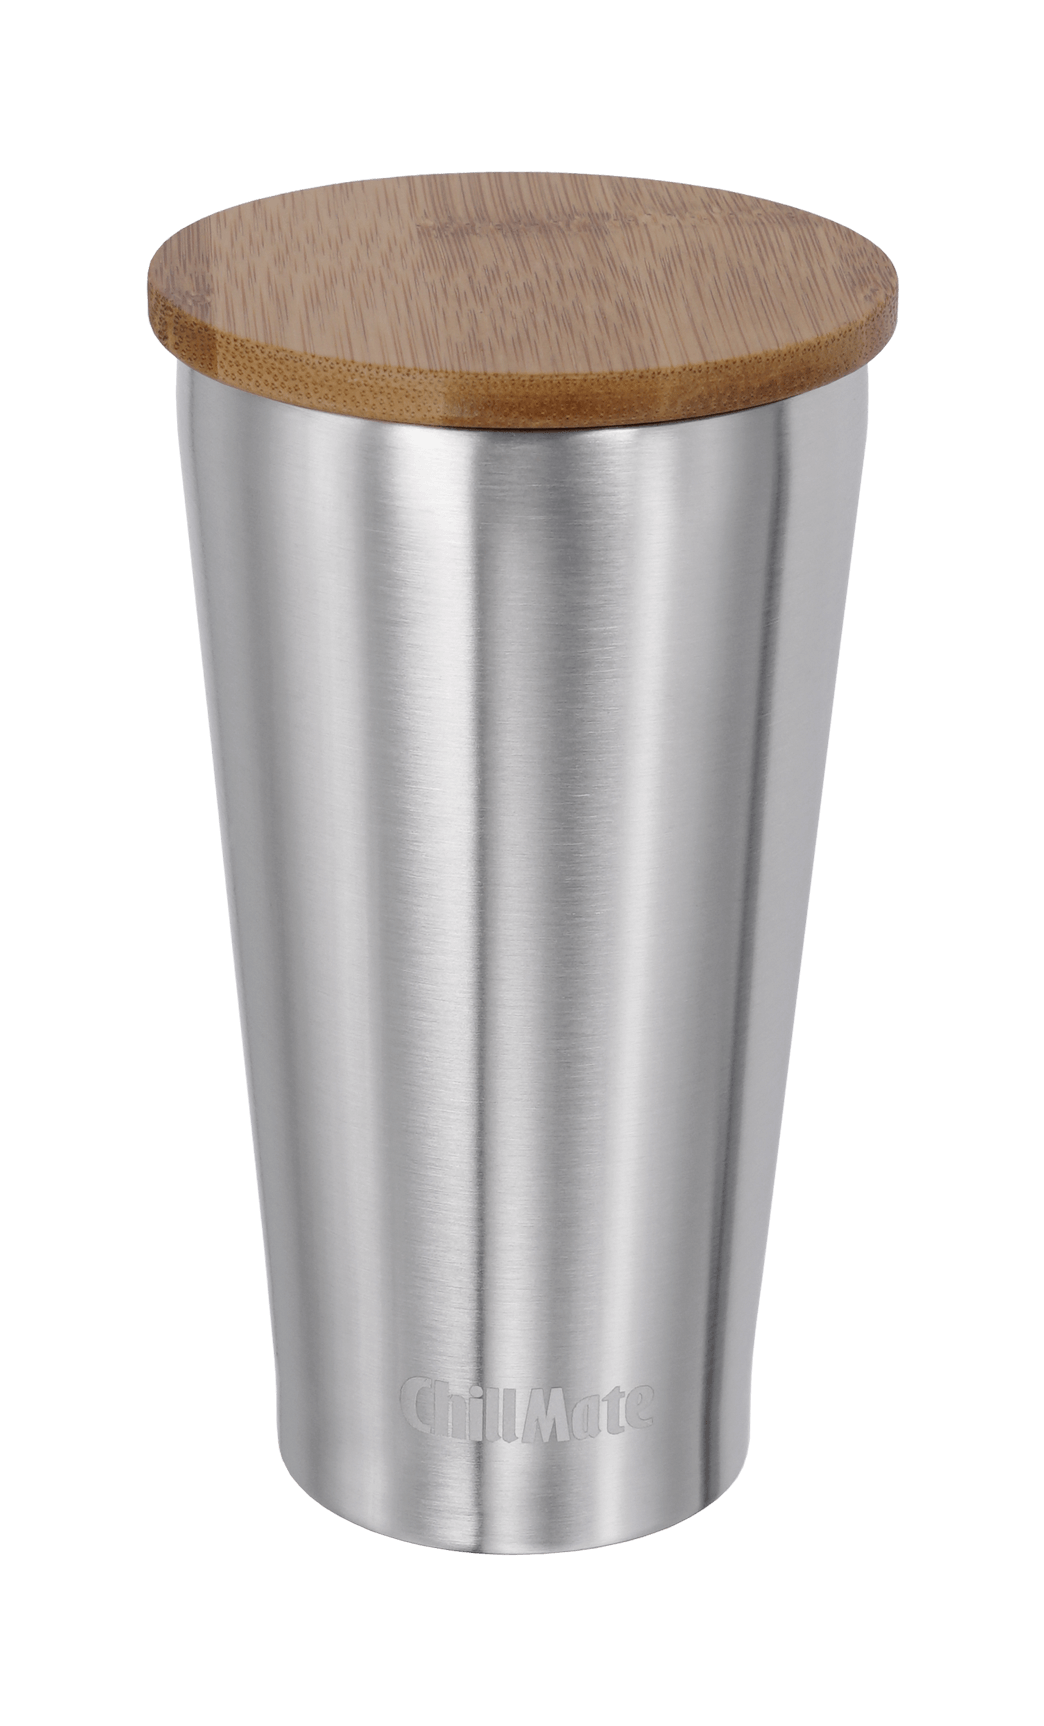 ChillMate 350S Cup with Bamboo Lid